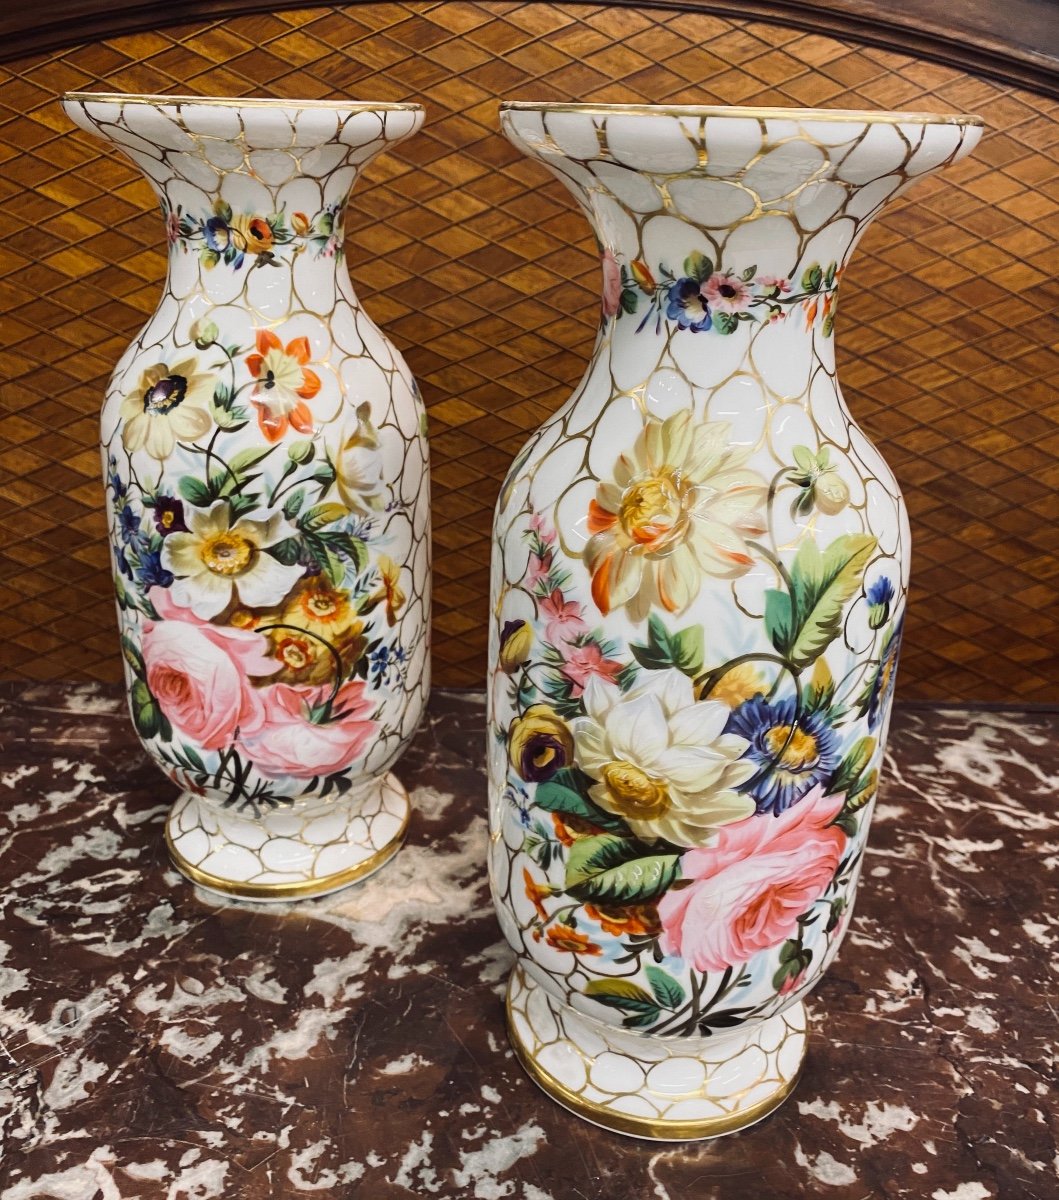 Porcelain Vases Are Hand Painted-photo-4